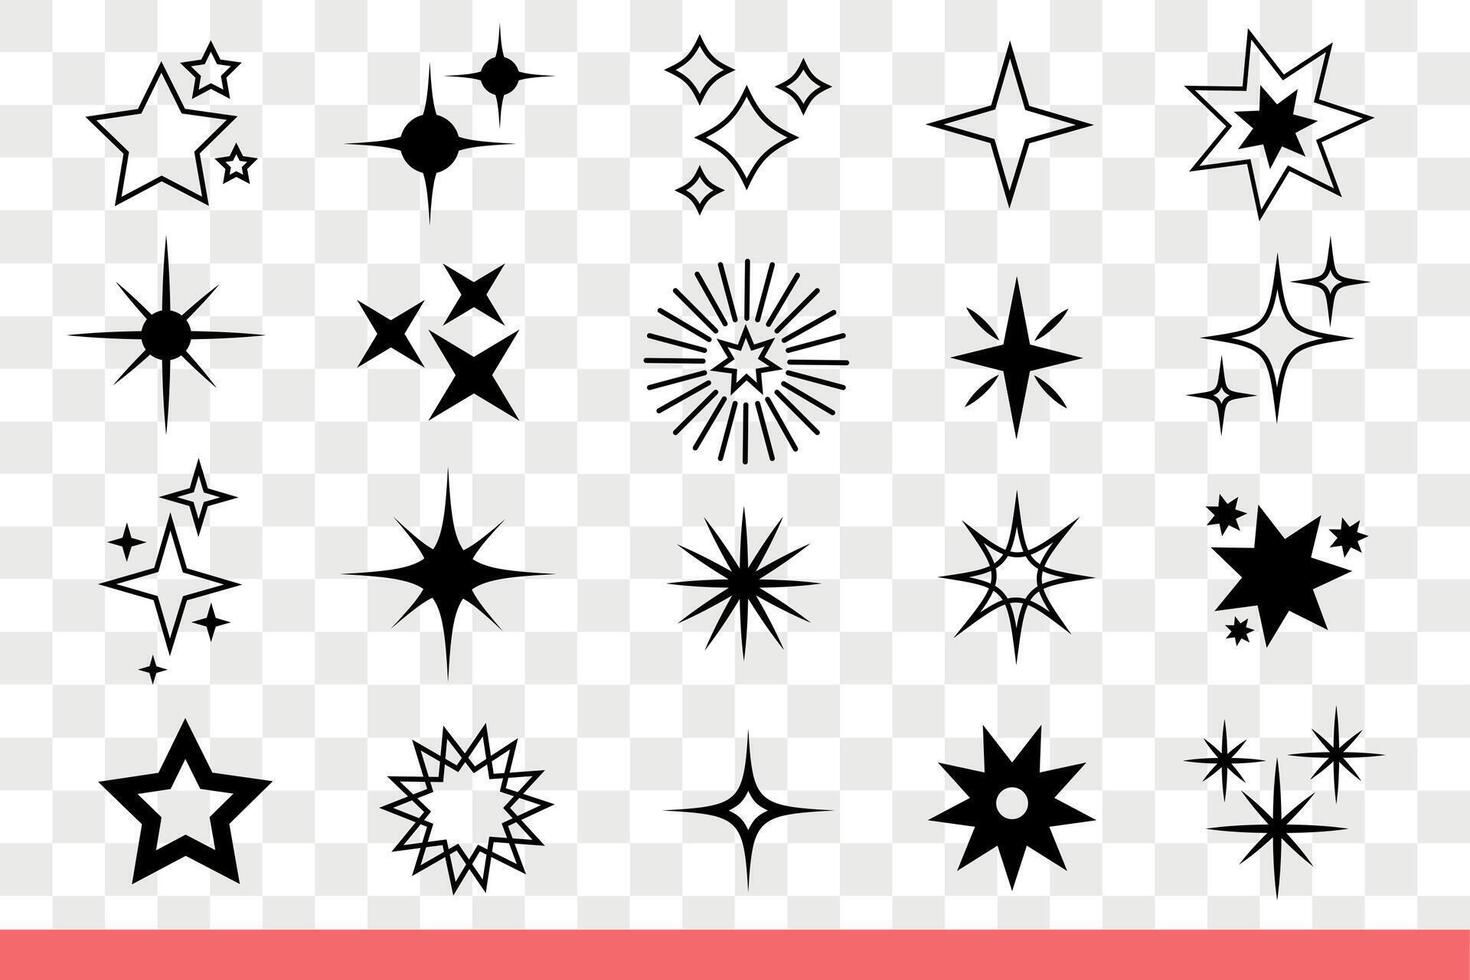 Stars and sparkles of different shapes glowing in night sky or reflecting. Hand drawn doodle. vector